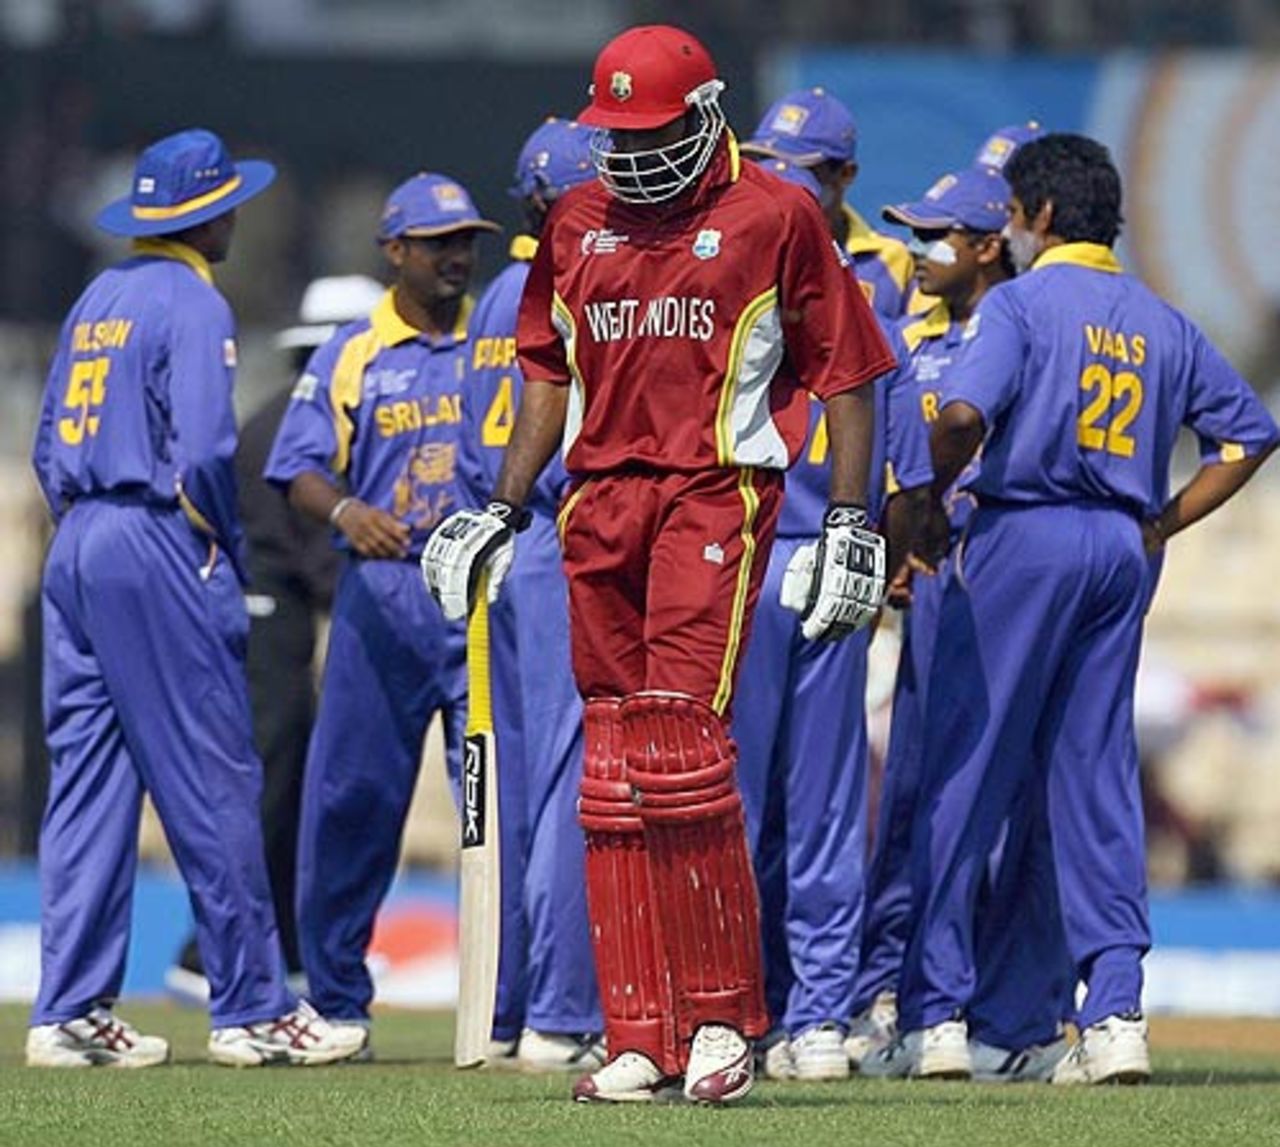 Chris Gayle makes his way back after losing his wicket at 1 for 1, Sri Lanka v West Indies, 6th qualifying match, Champions Trophy, Mumbai, October 14, 2006